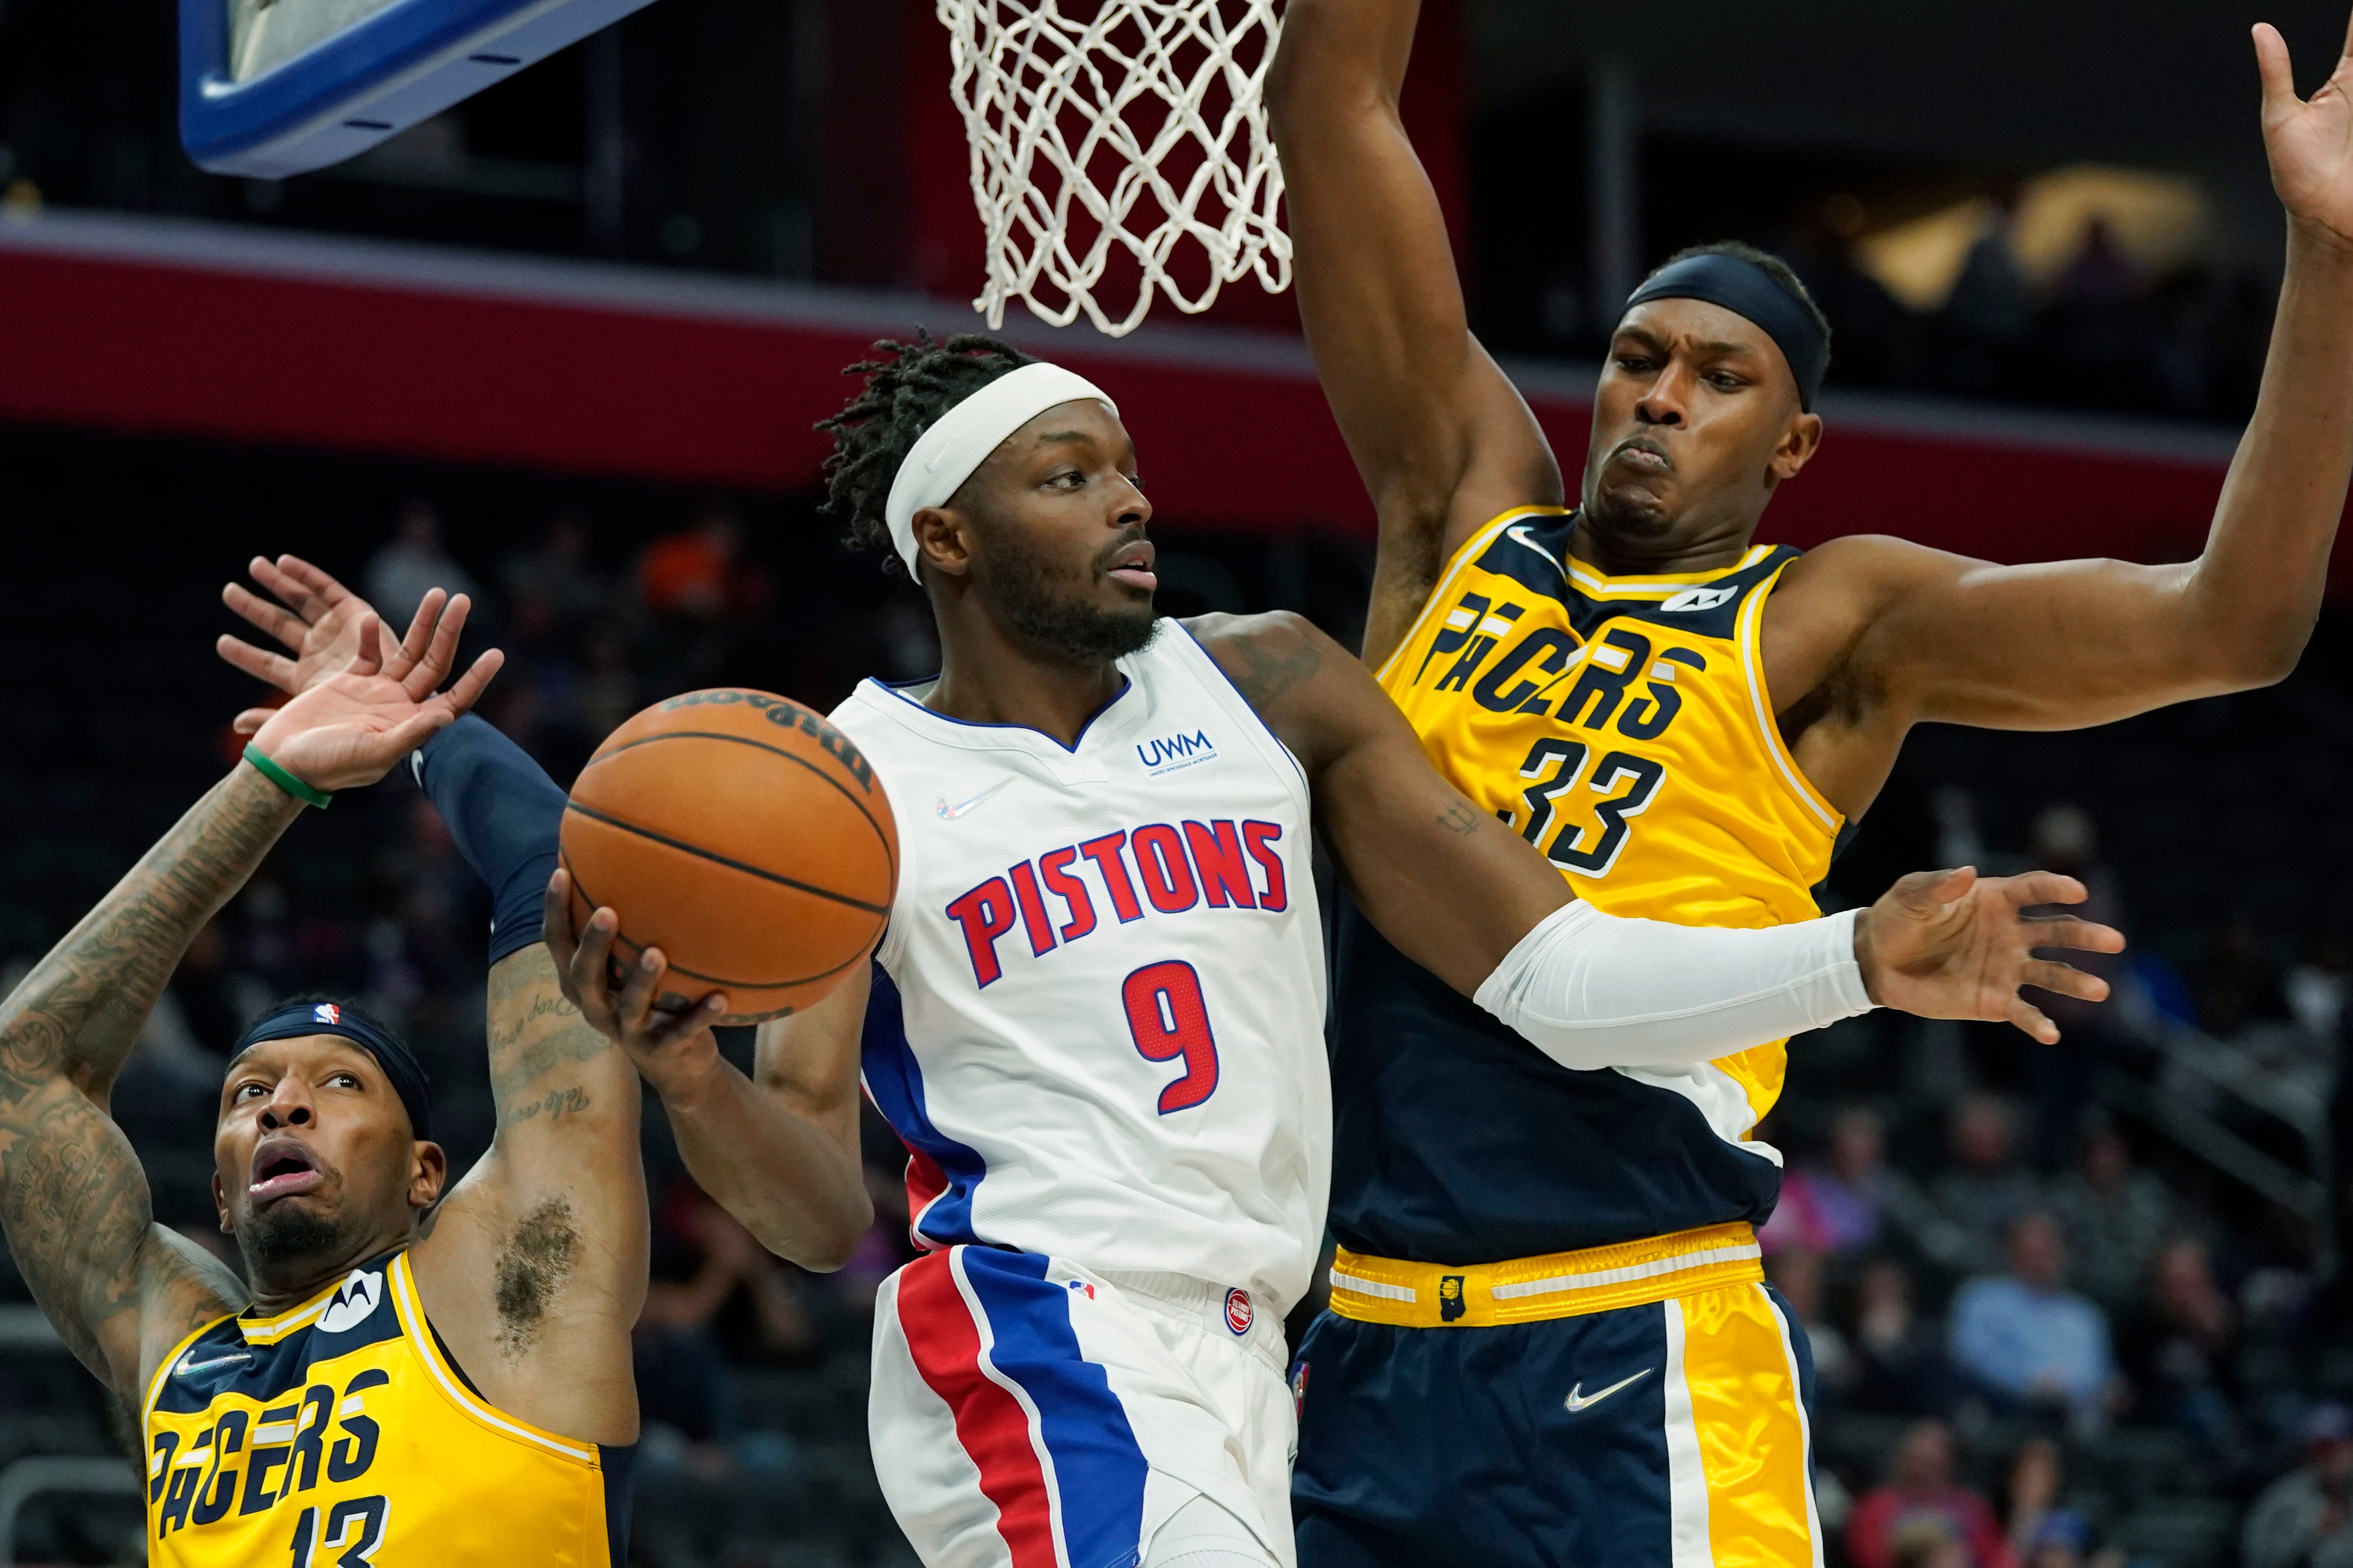 PACERS-PISTONS